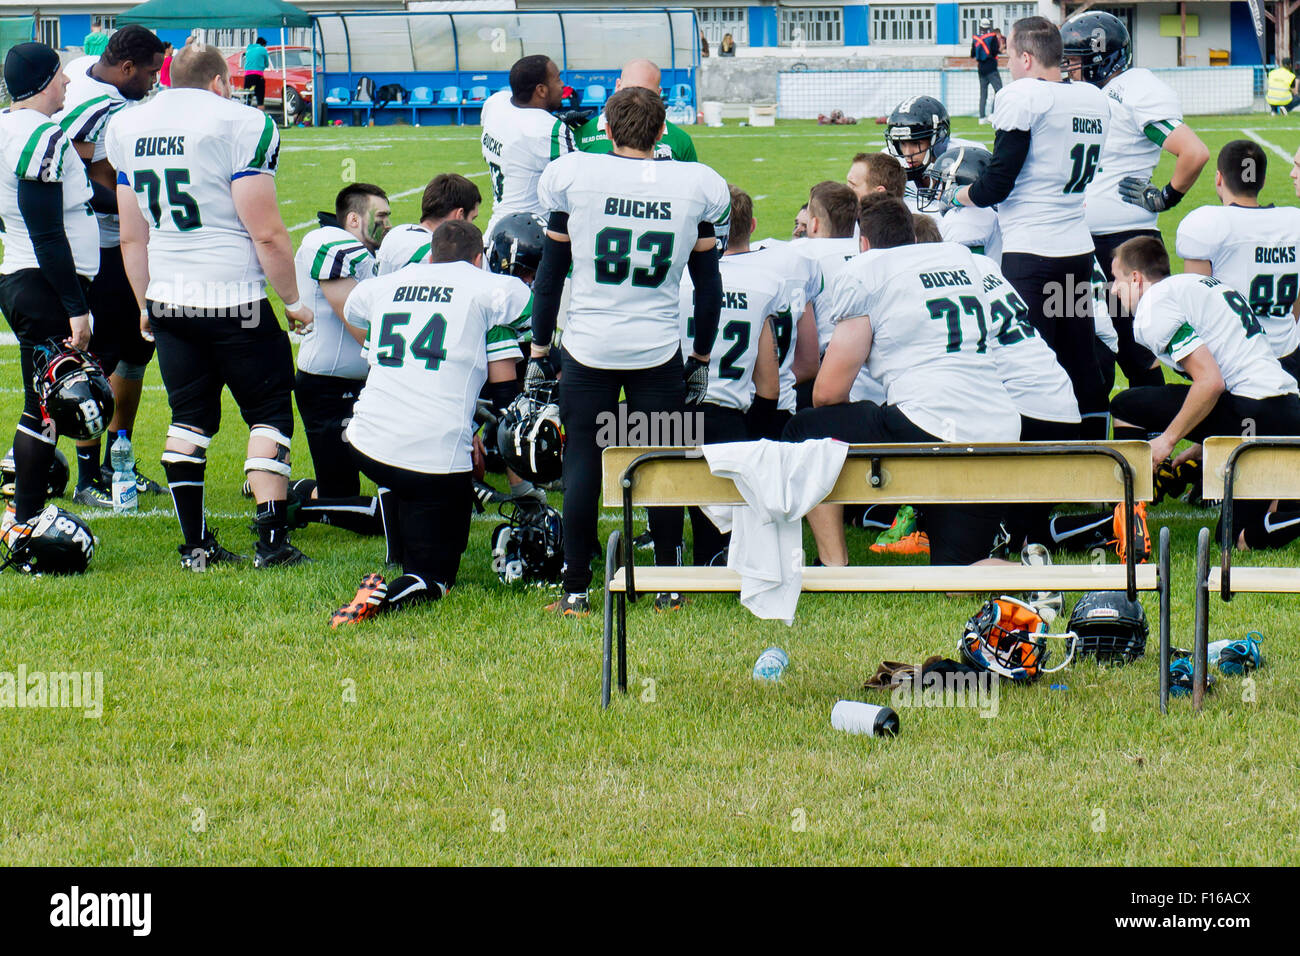 team of American football players on the sideline Stock Photo